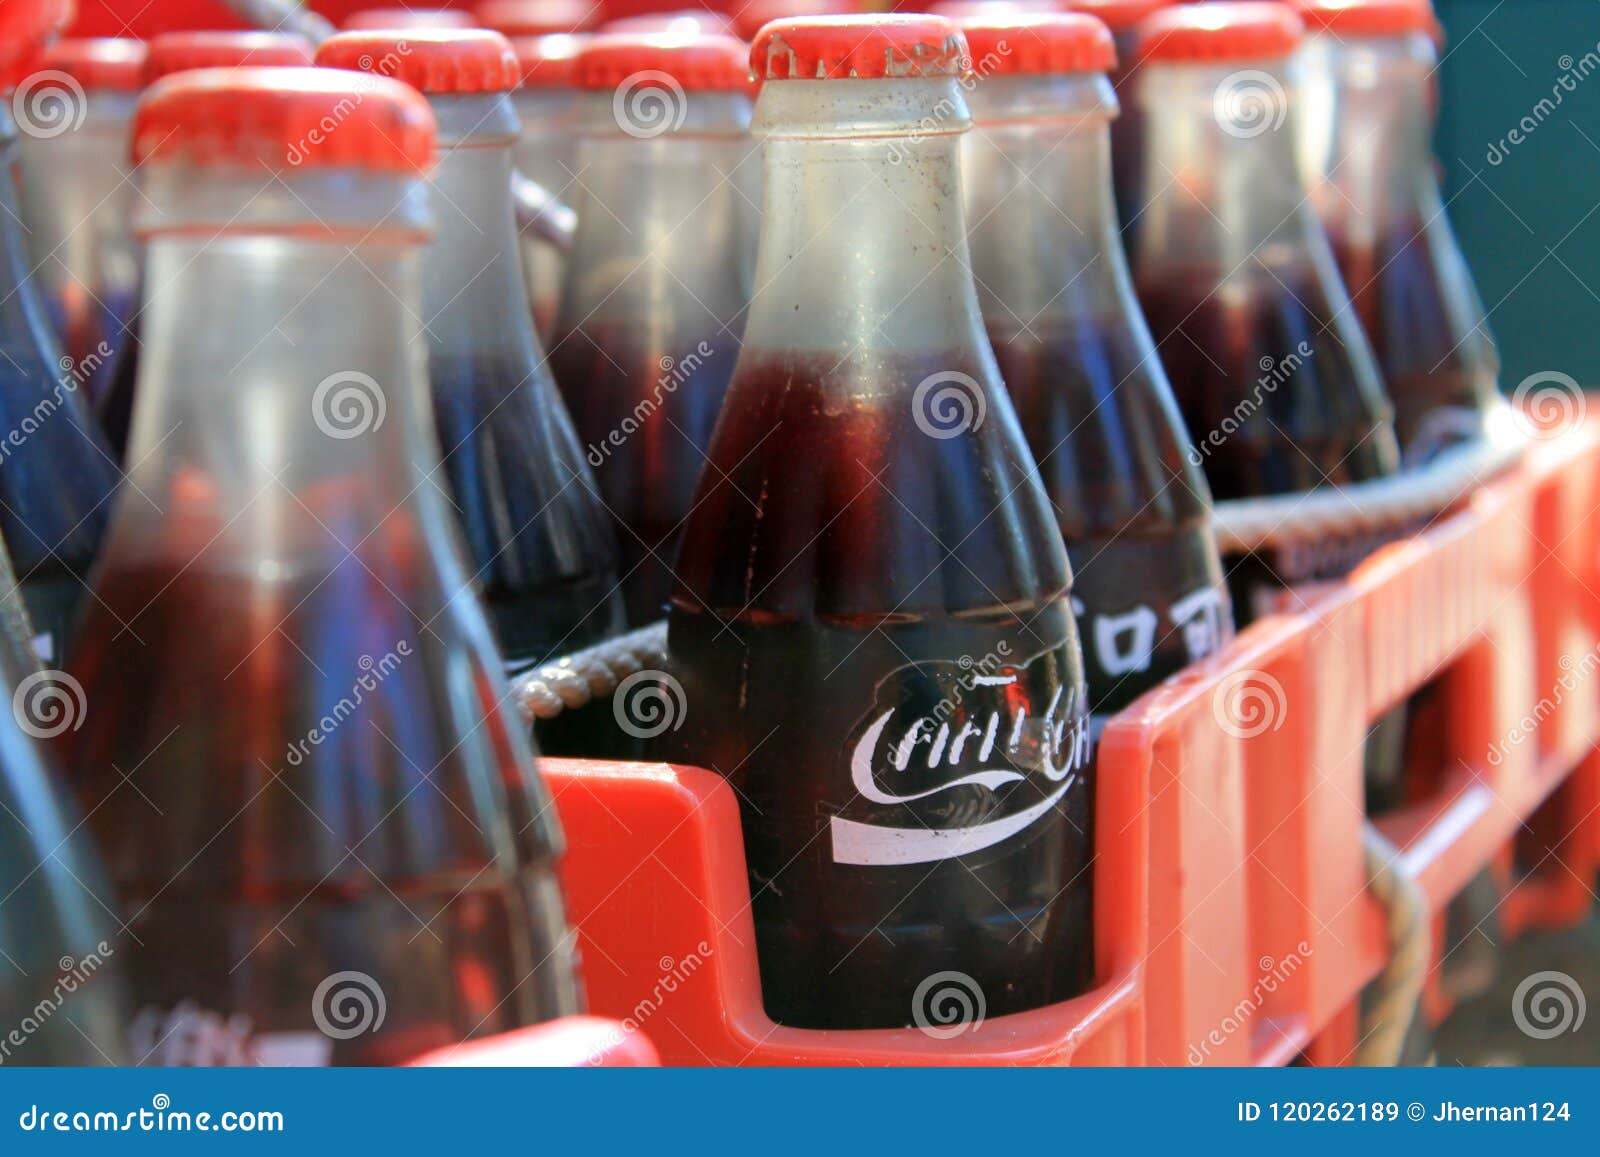 Foreign Coca-Cola Bottles in Crate Editorial Stock Image - Image of brand,  exciting: 120262189